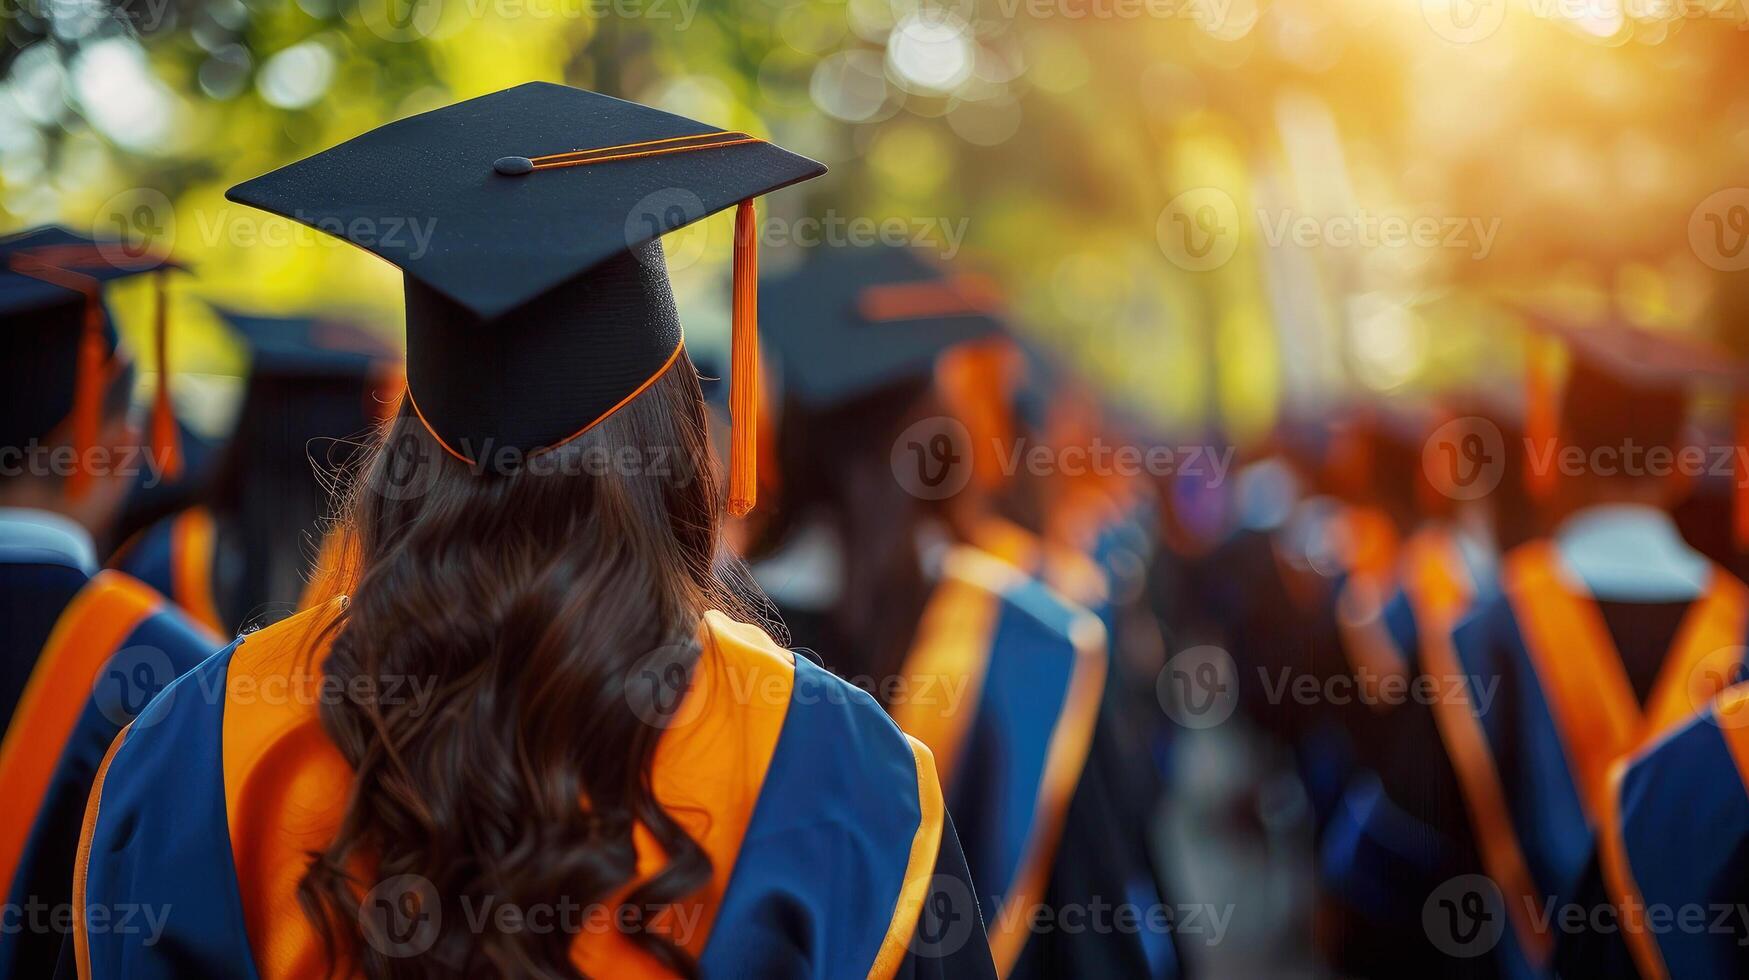 backside view of graduation mortarboards during ceremony commencement success graduates of university. Concept education congratulation. Soft diffused sunlight bathes scene in warm glow photo